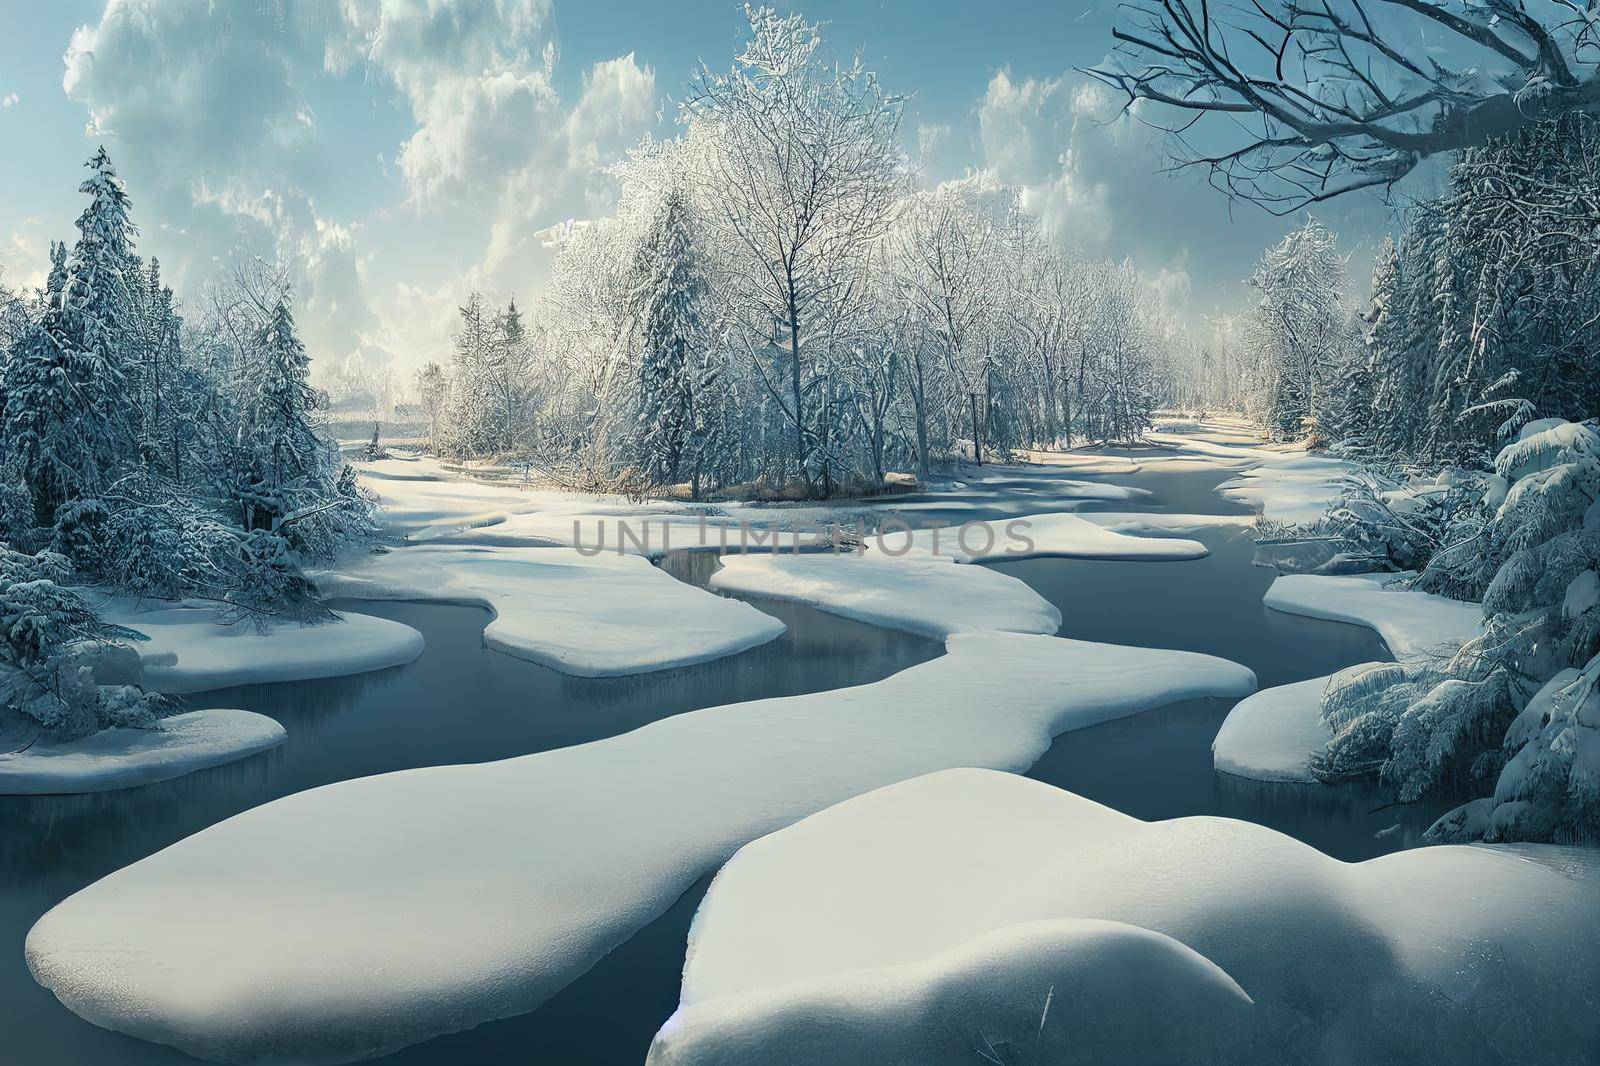 Clouds over the river in the winter snow forest. River reflection in winter snow forest. Winter river in snowy forest. Winter river landscape. High quality illustration